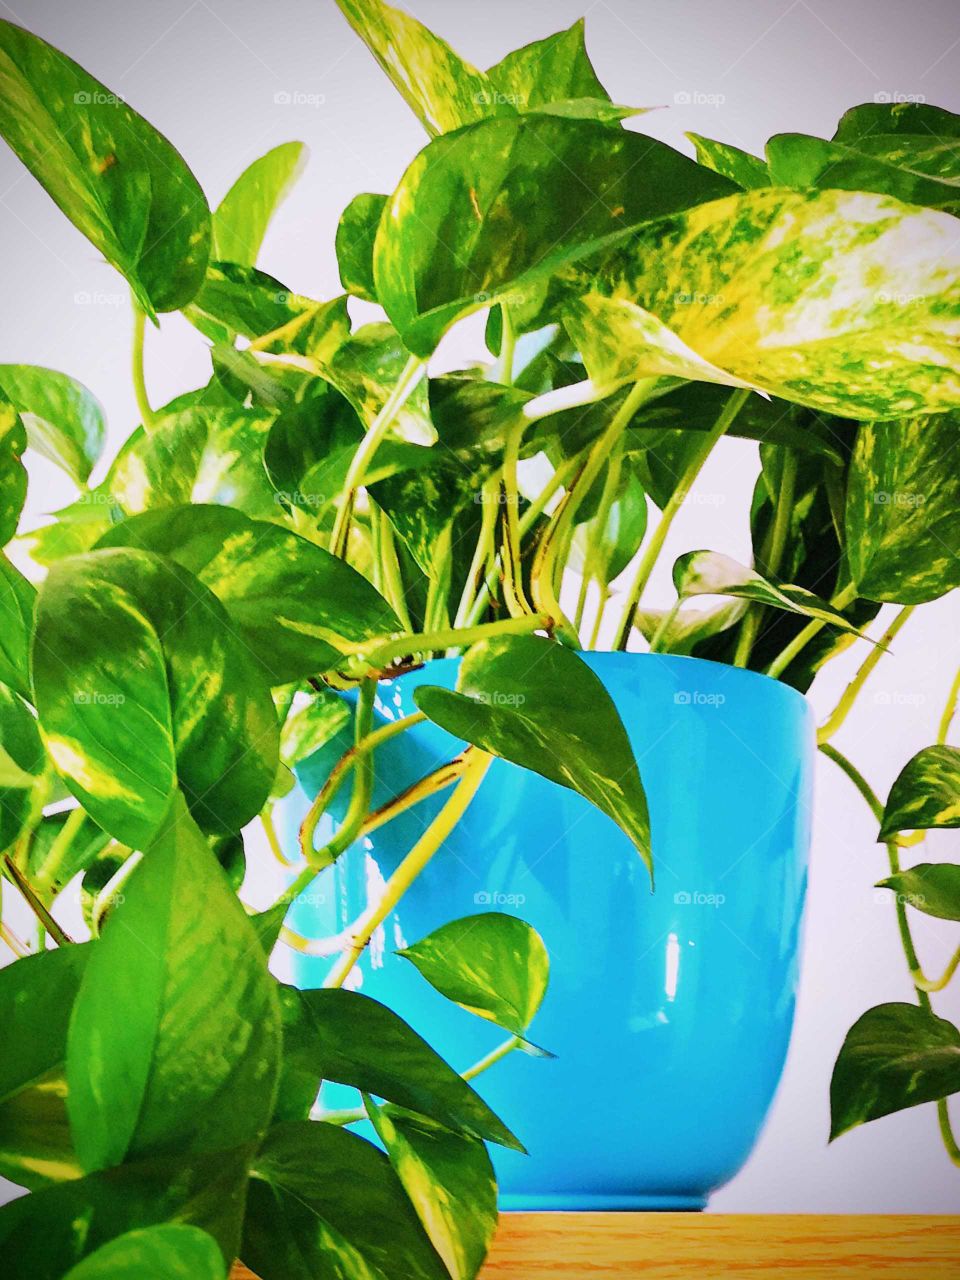 green plant in a blue pot